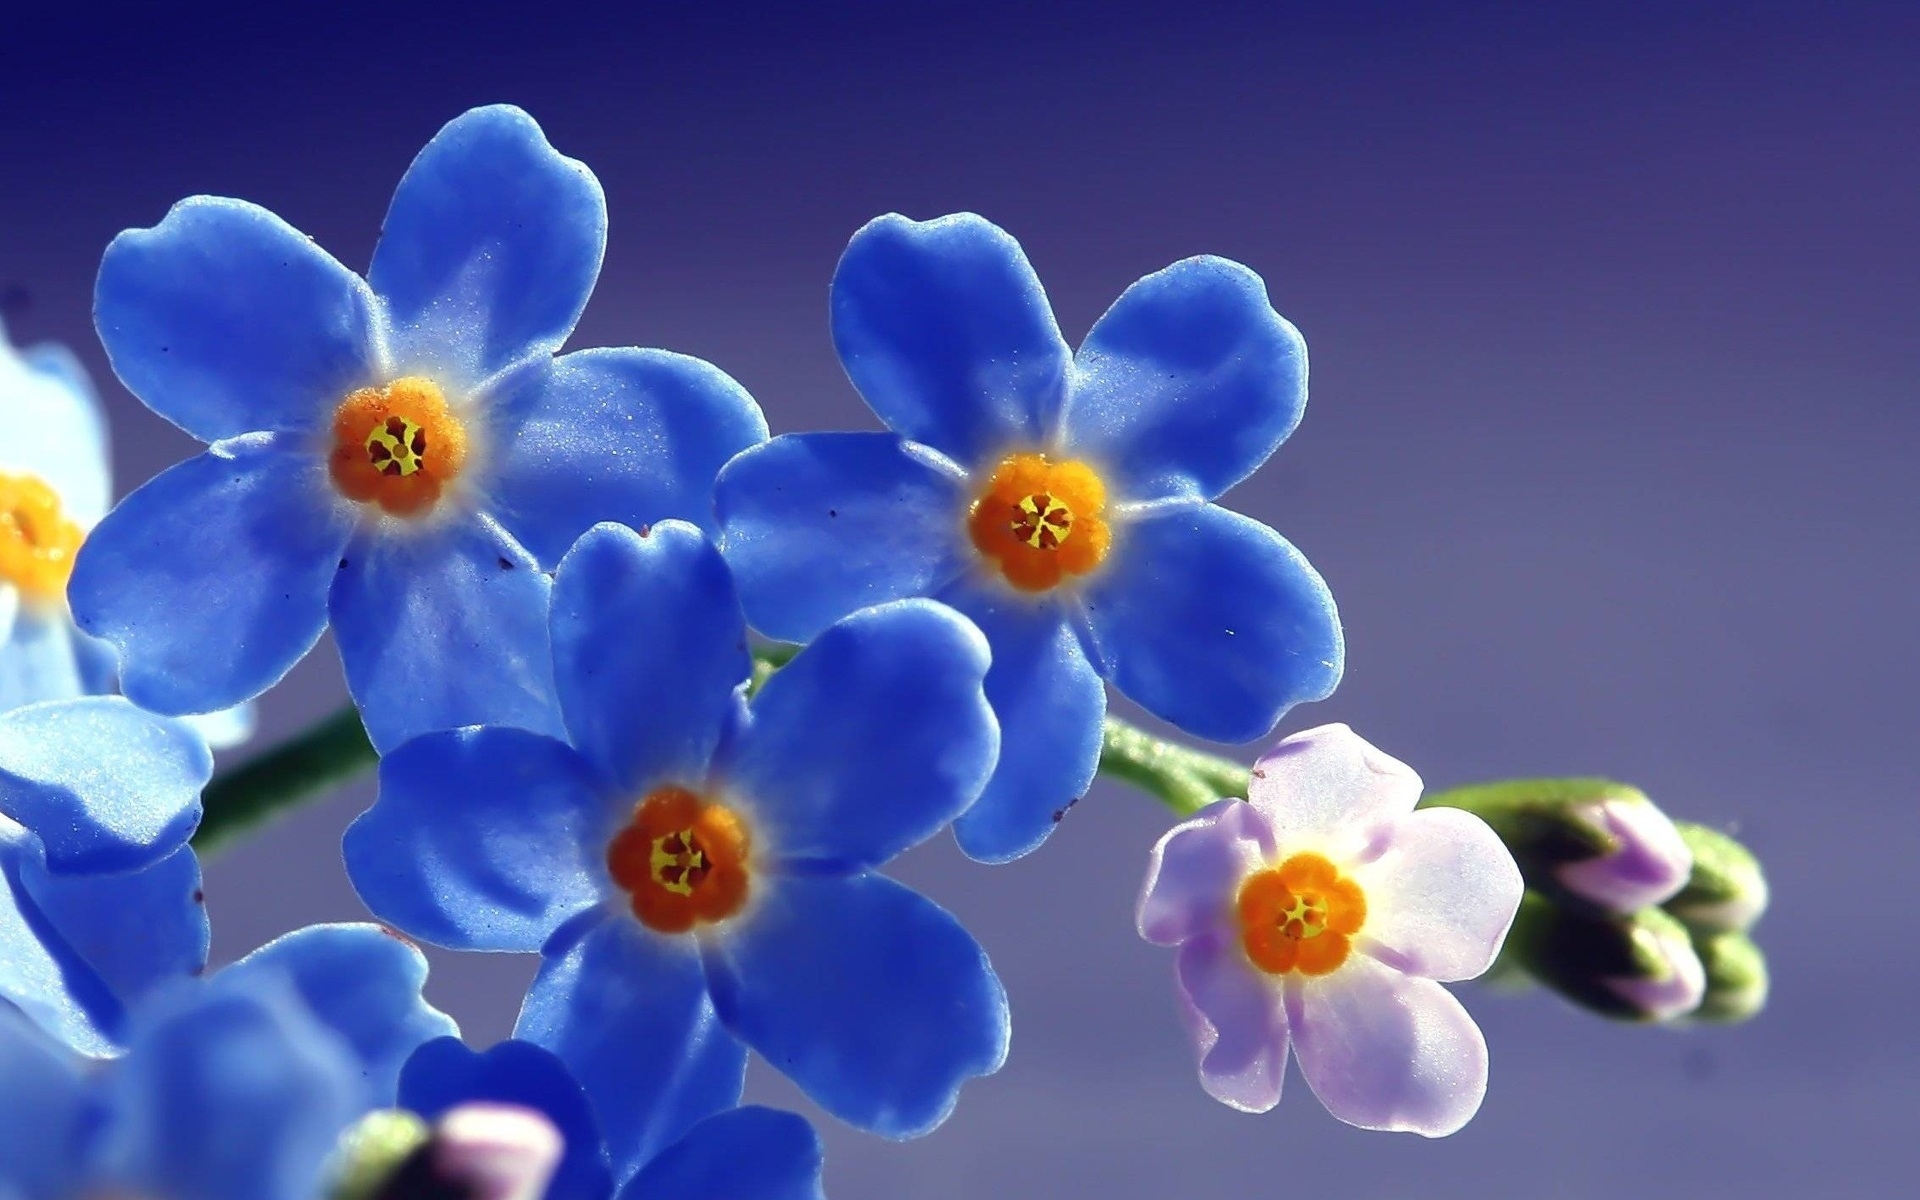 High Resolution Flower Images Free Download - HD Wallpaper 